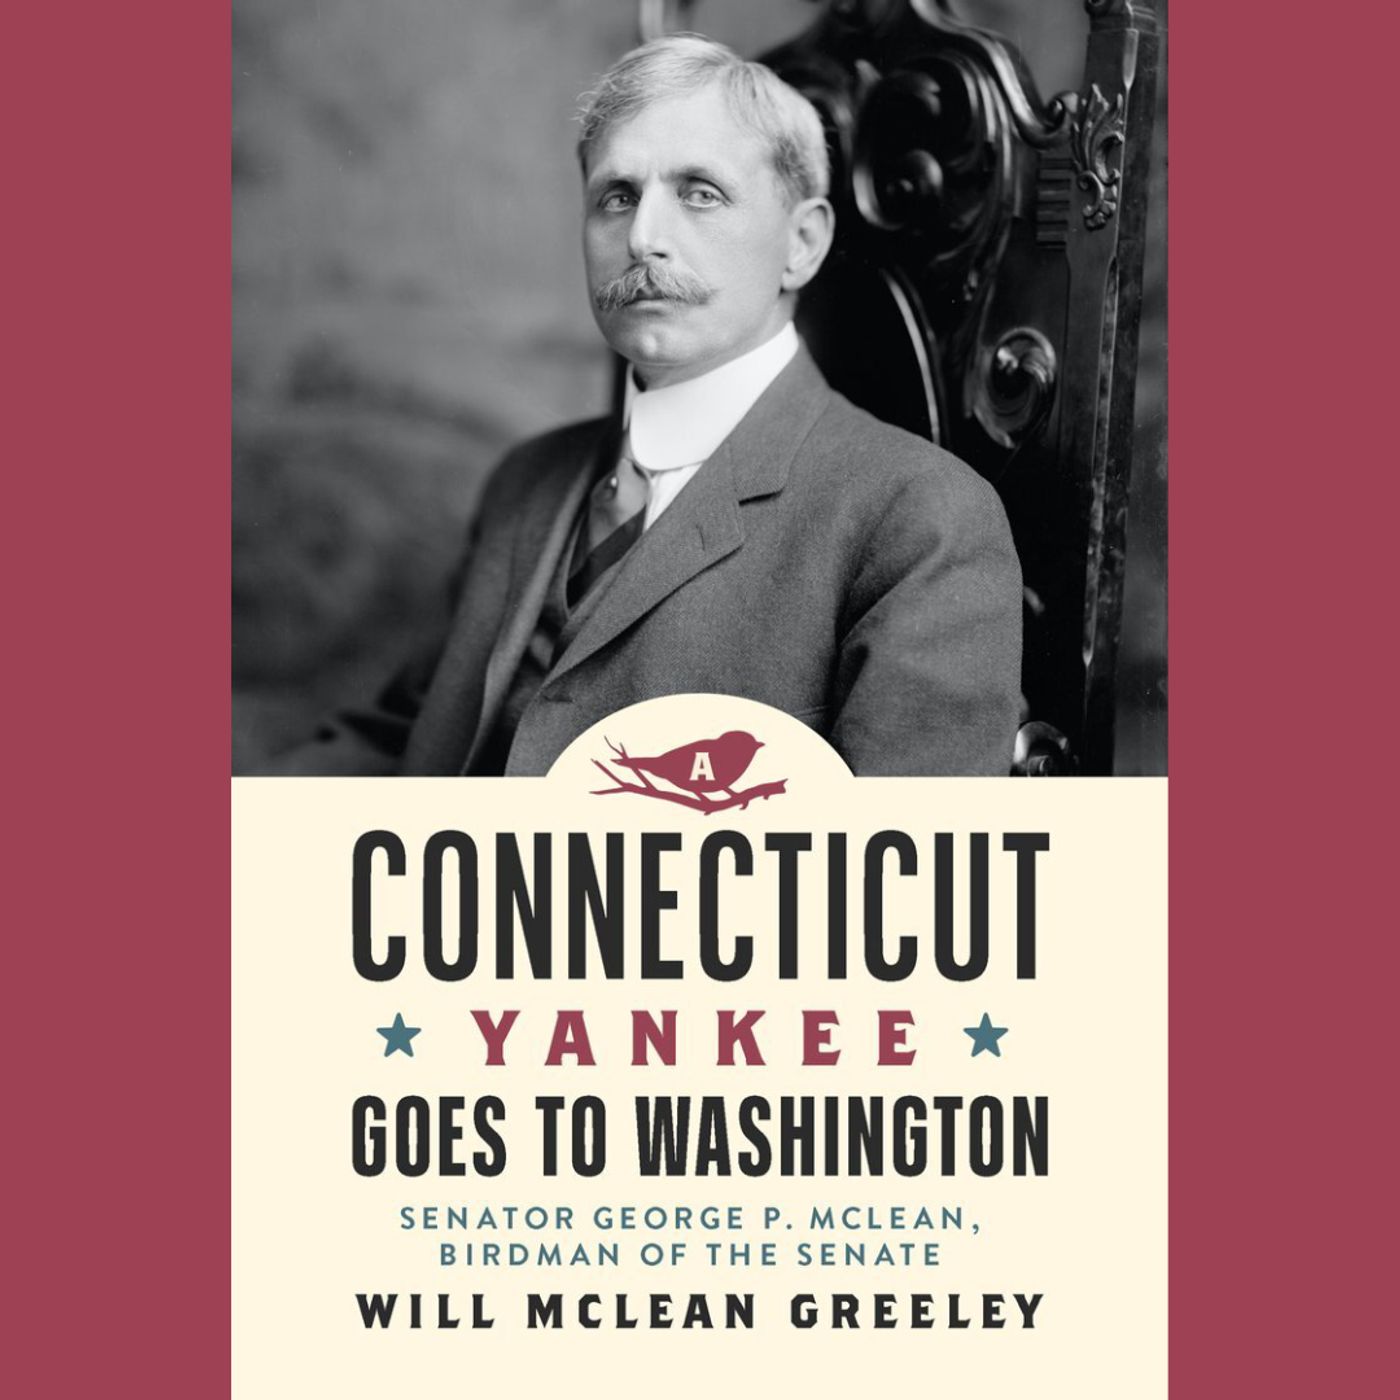 Will McLean Greeley, author of A Connecticut Yankee Goes to Washington, George P. McLean, Birdman of the Senate